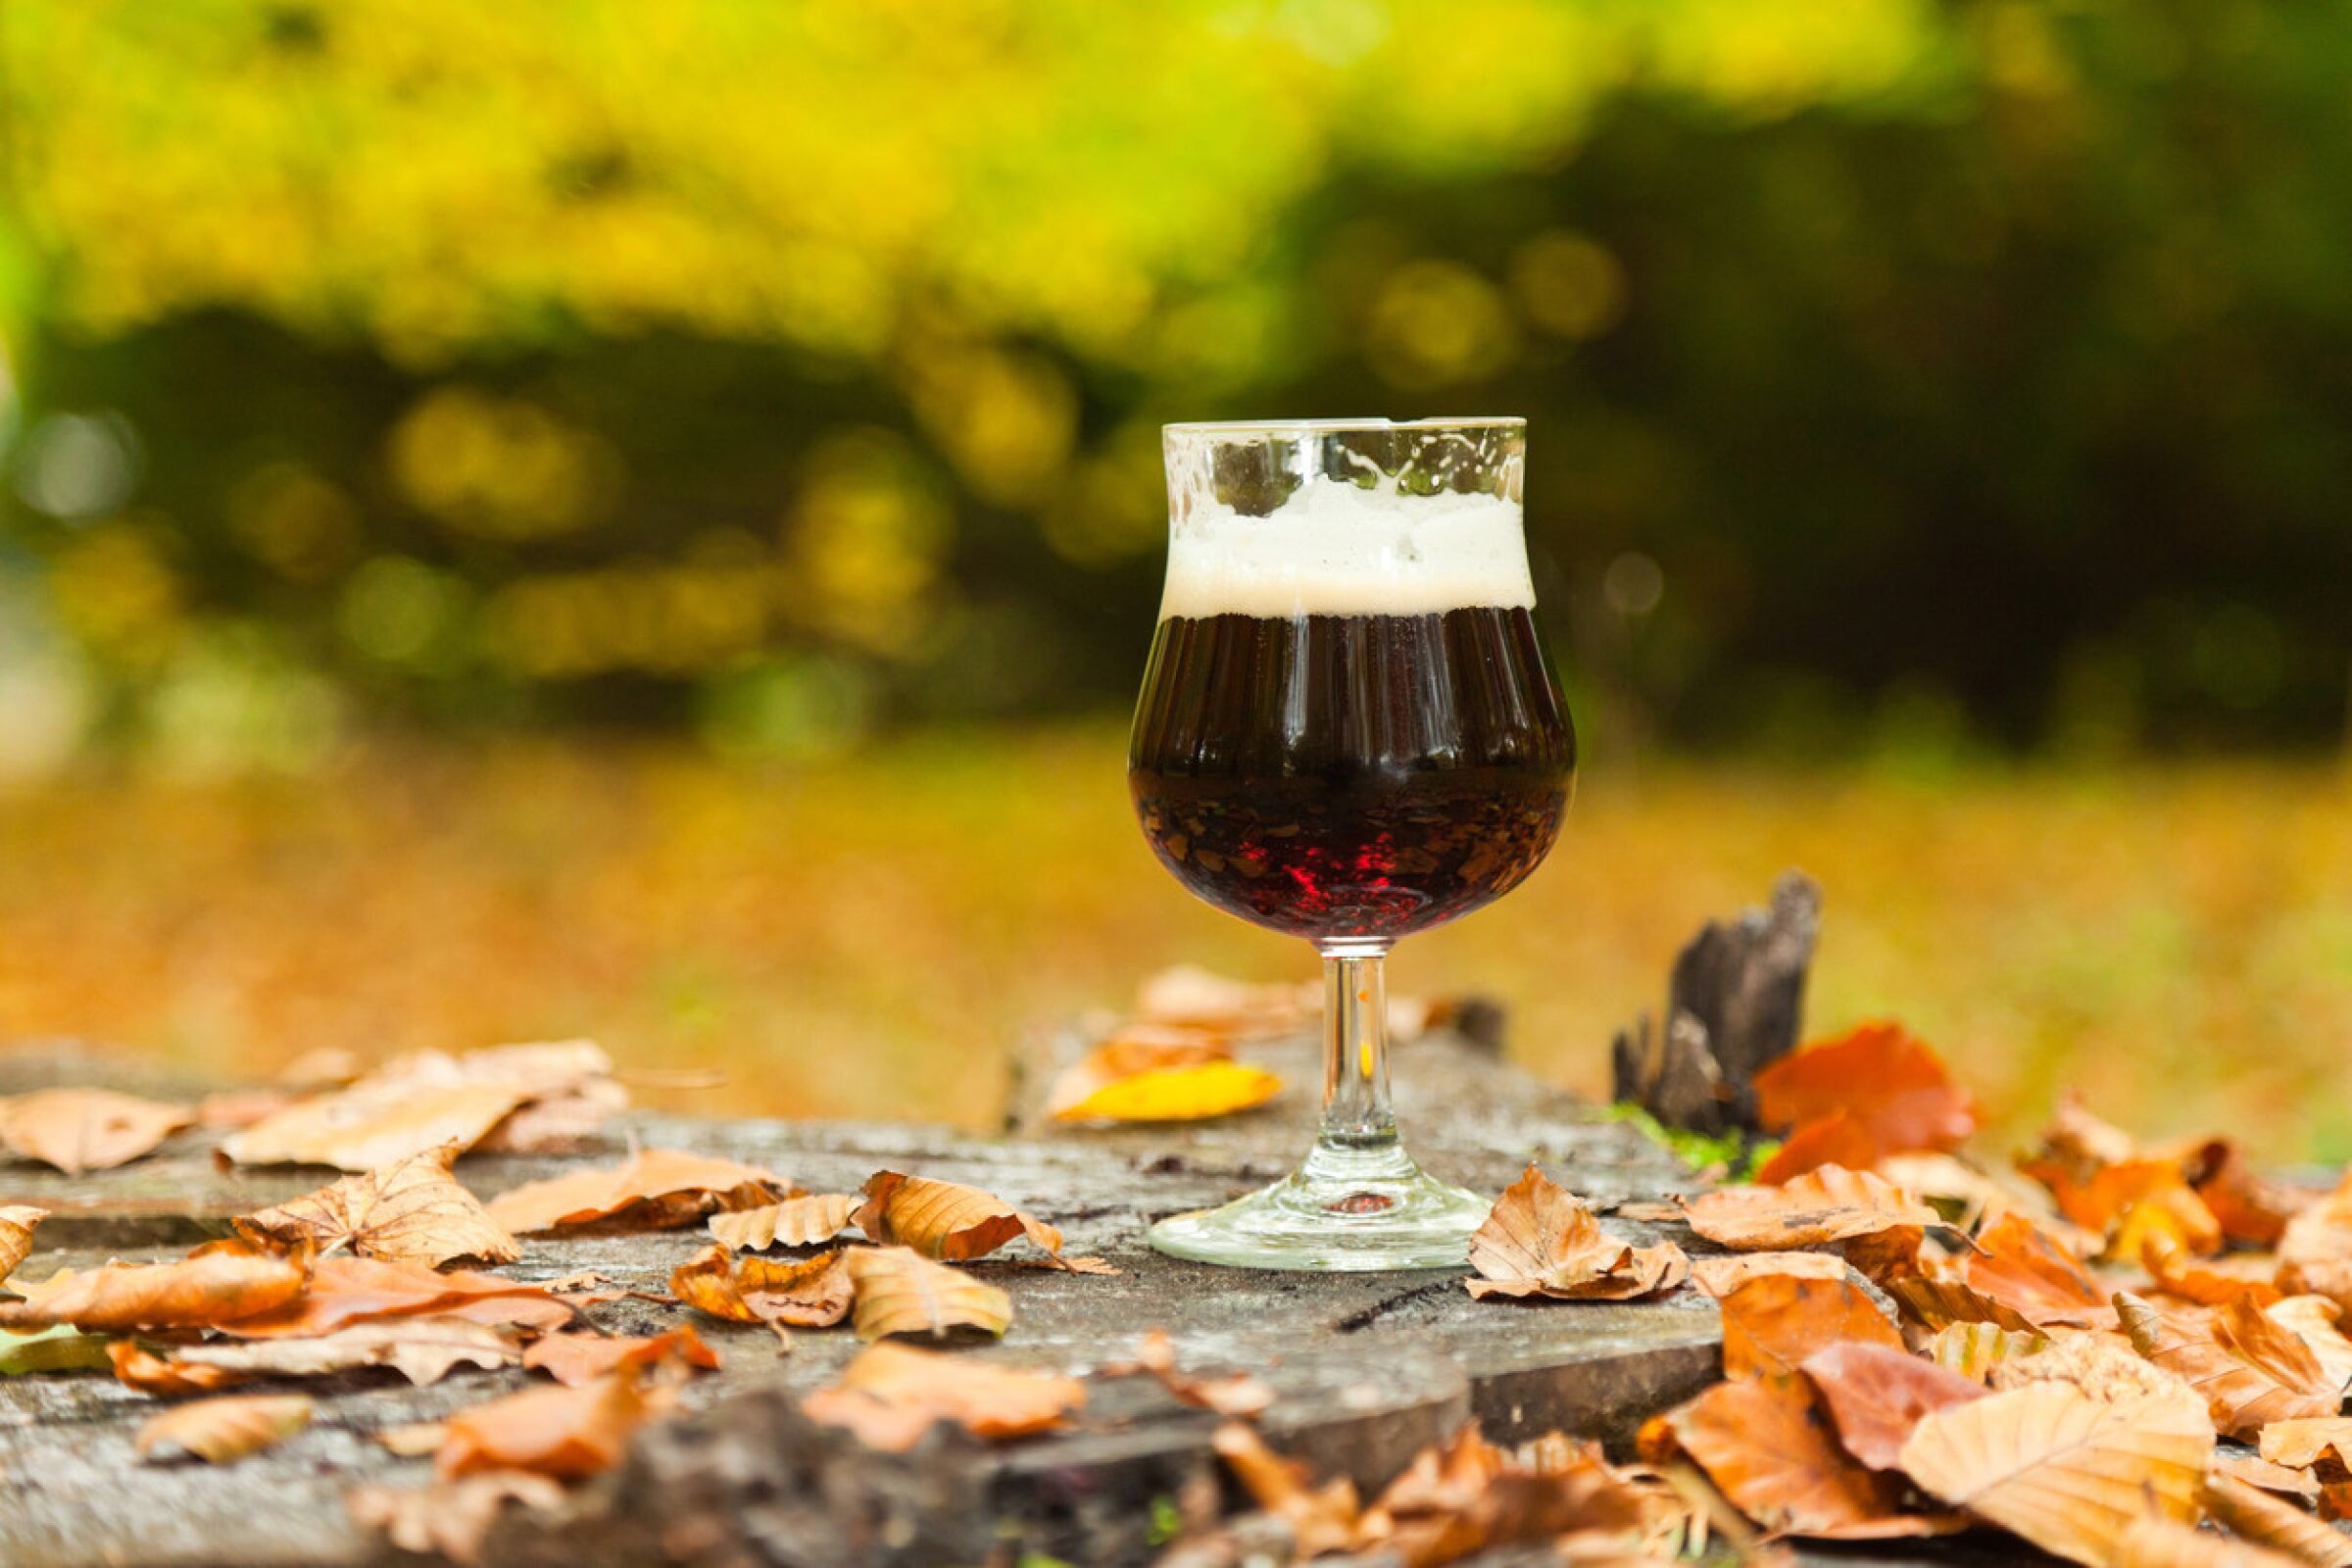 As the leaves fall from the trees, San Diegans begin cozying up to darker, fall flavored brews.